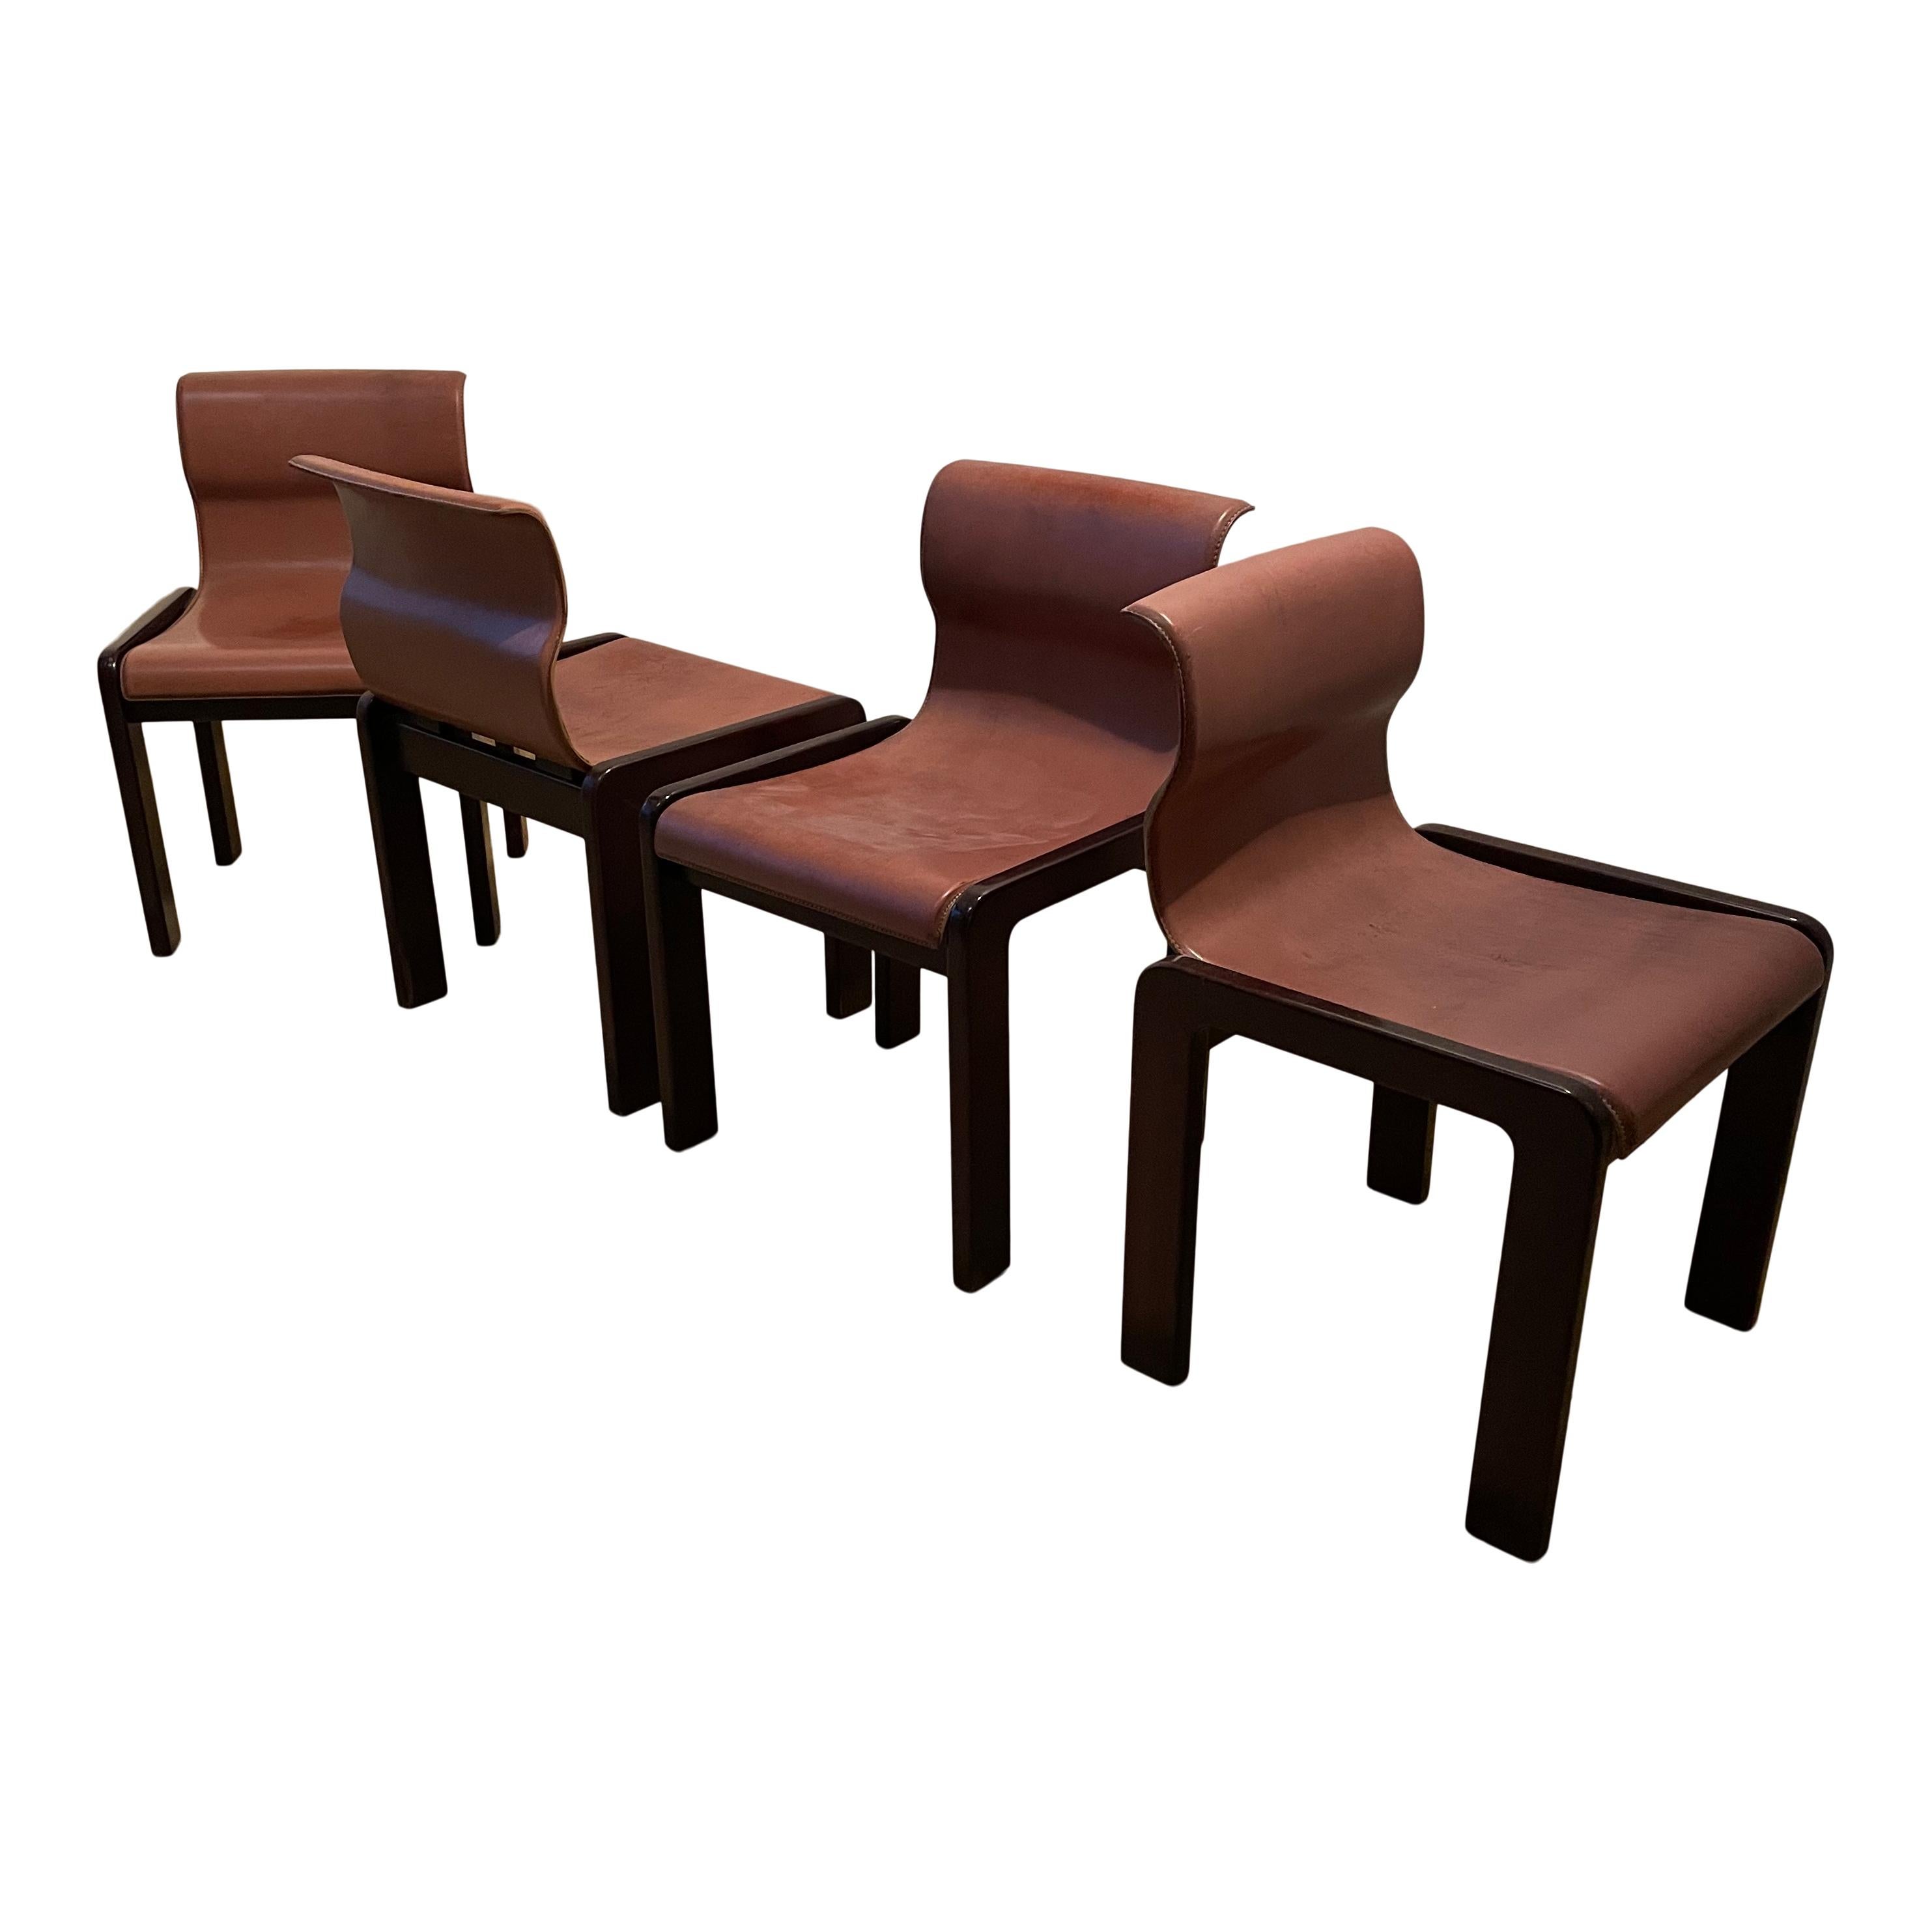 Mid-Century Modern Afra & Tobia Scarpa Midcentury Leather and Plywood Dining Chair, 1966, Set of 4 For Sale